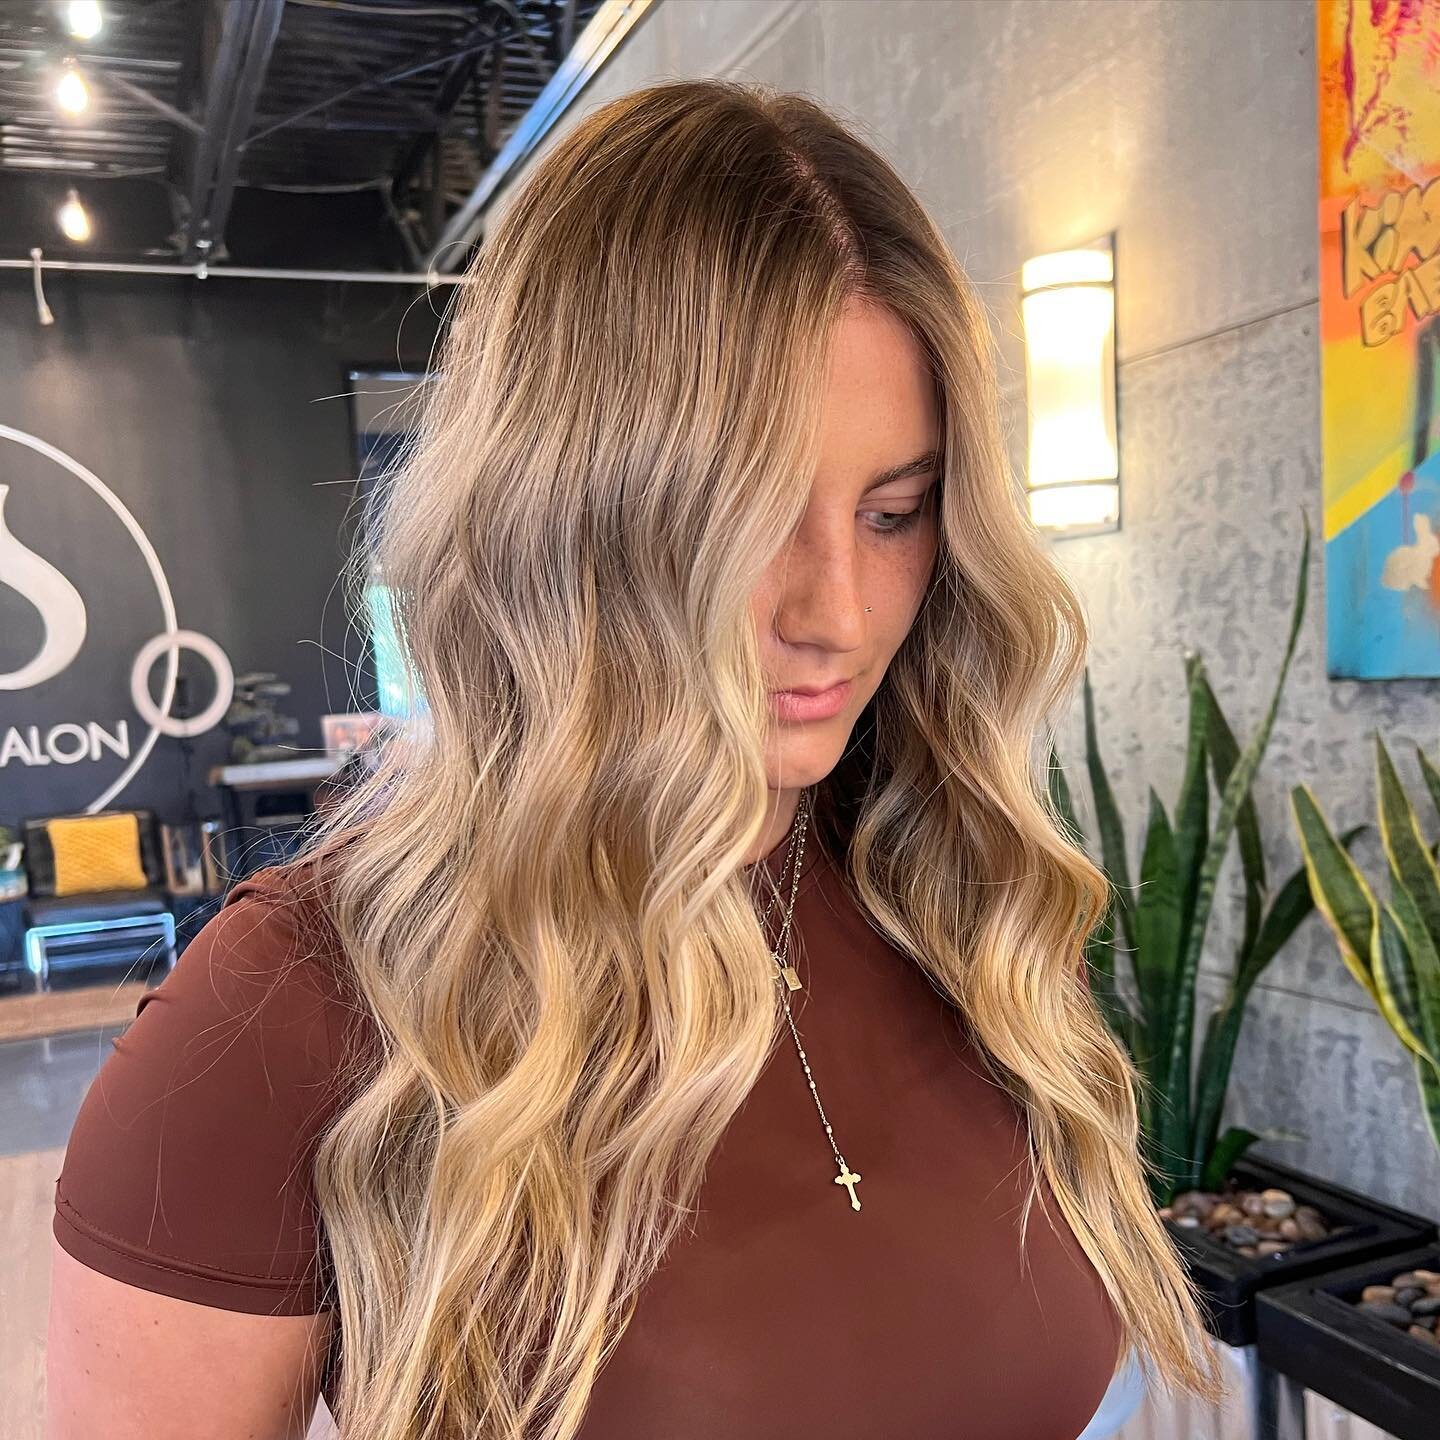 Nothing like a fall blonde 🍂 @cassandralivzbeauty brought this babe from bright blonde to rooty blonde for autumn! 🖤

#nyhairstylist #hudsonvalleyhairstylist #rocklandcountyhairstylist #newyorkhairstylist #nychairstylist #rootyblonde #rootmelt #fal